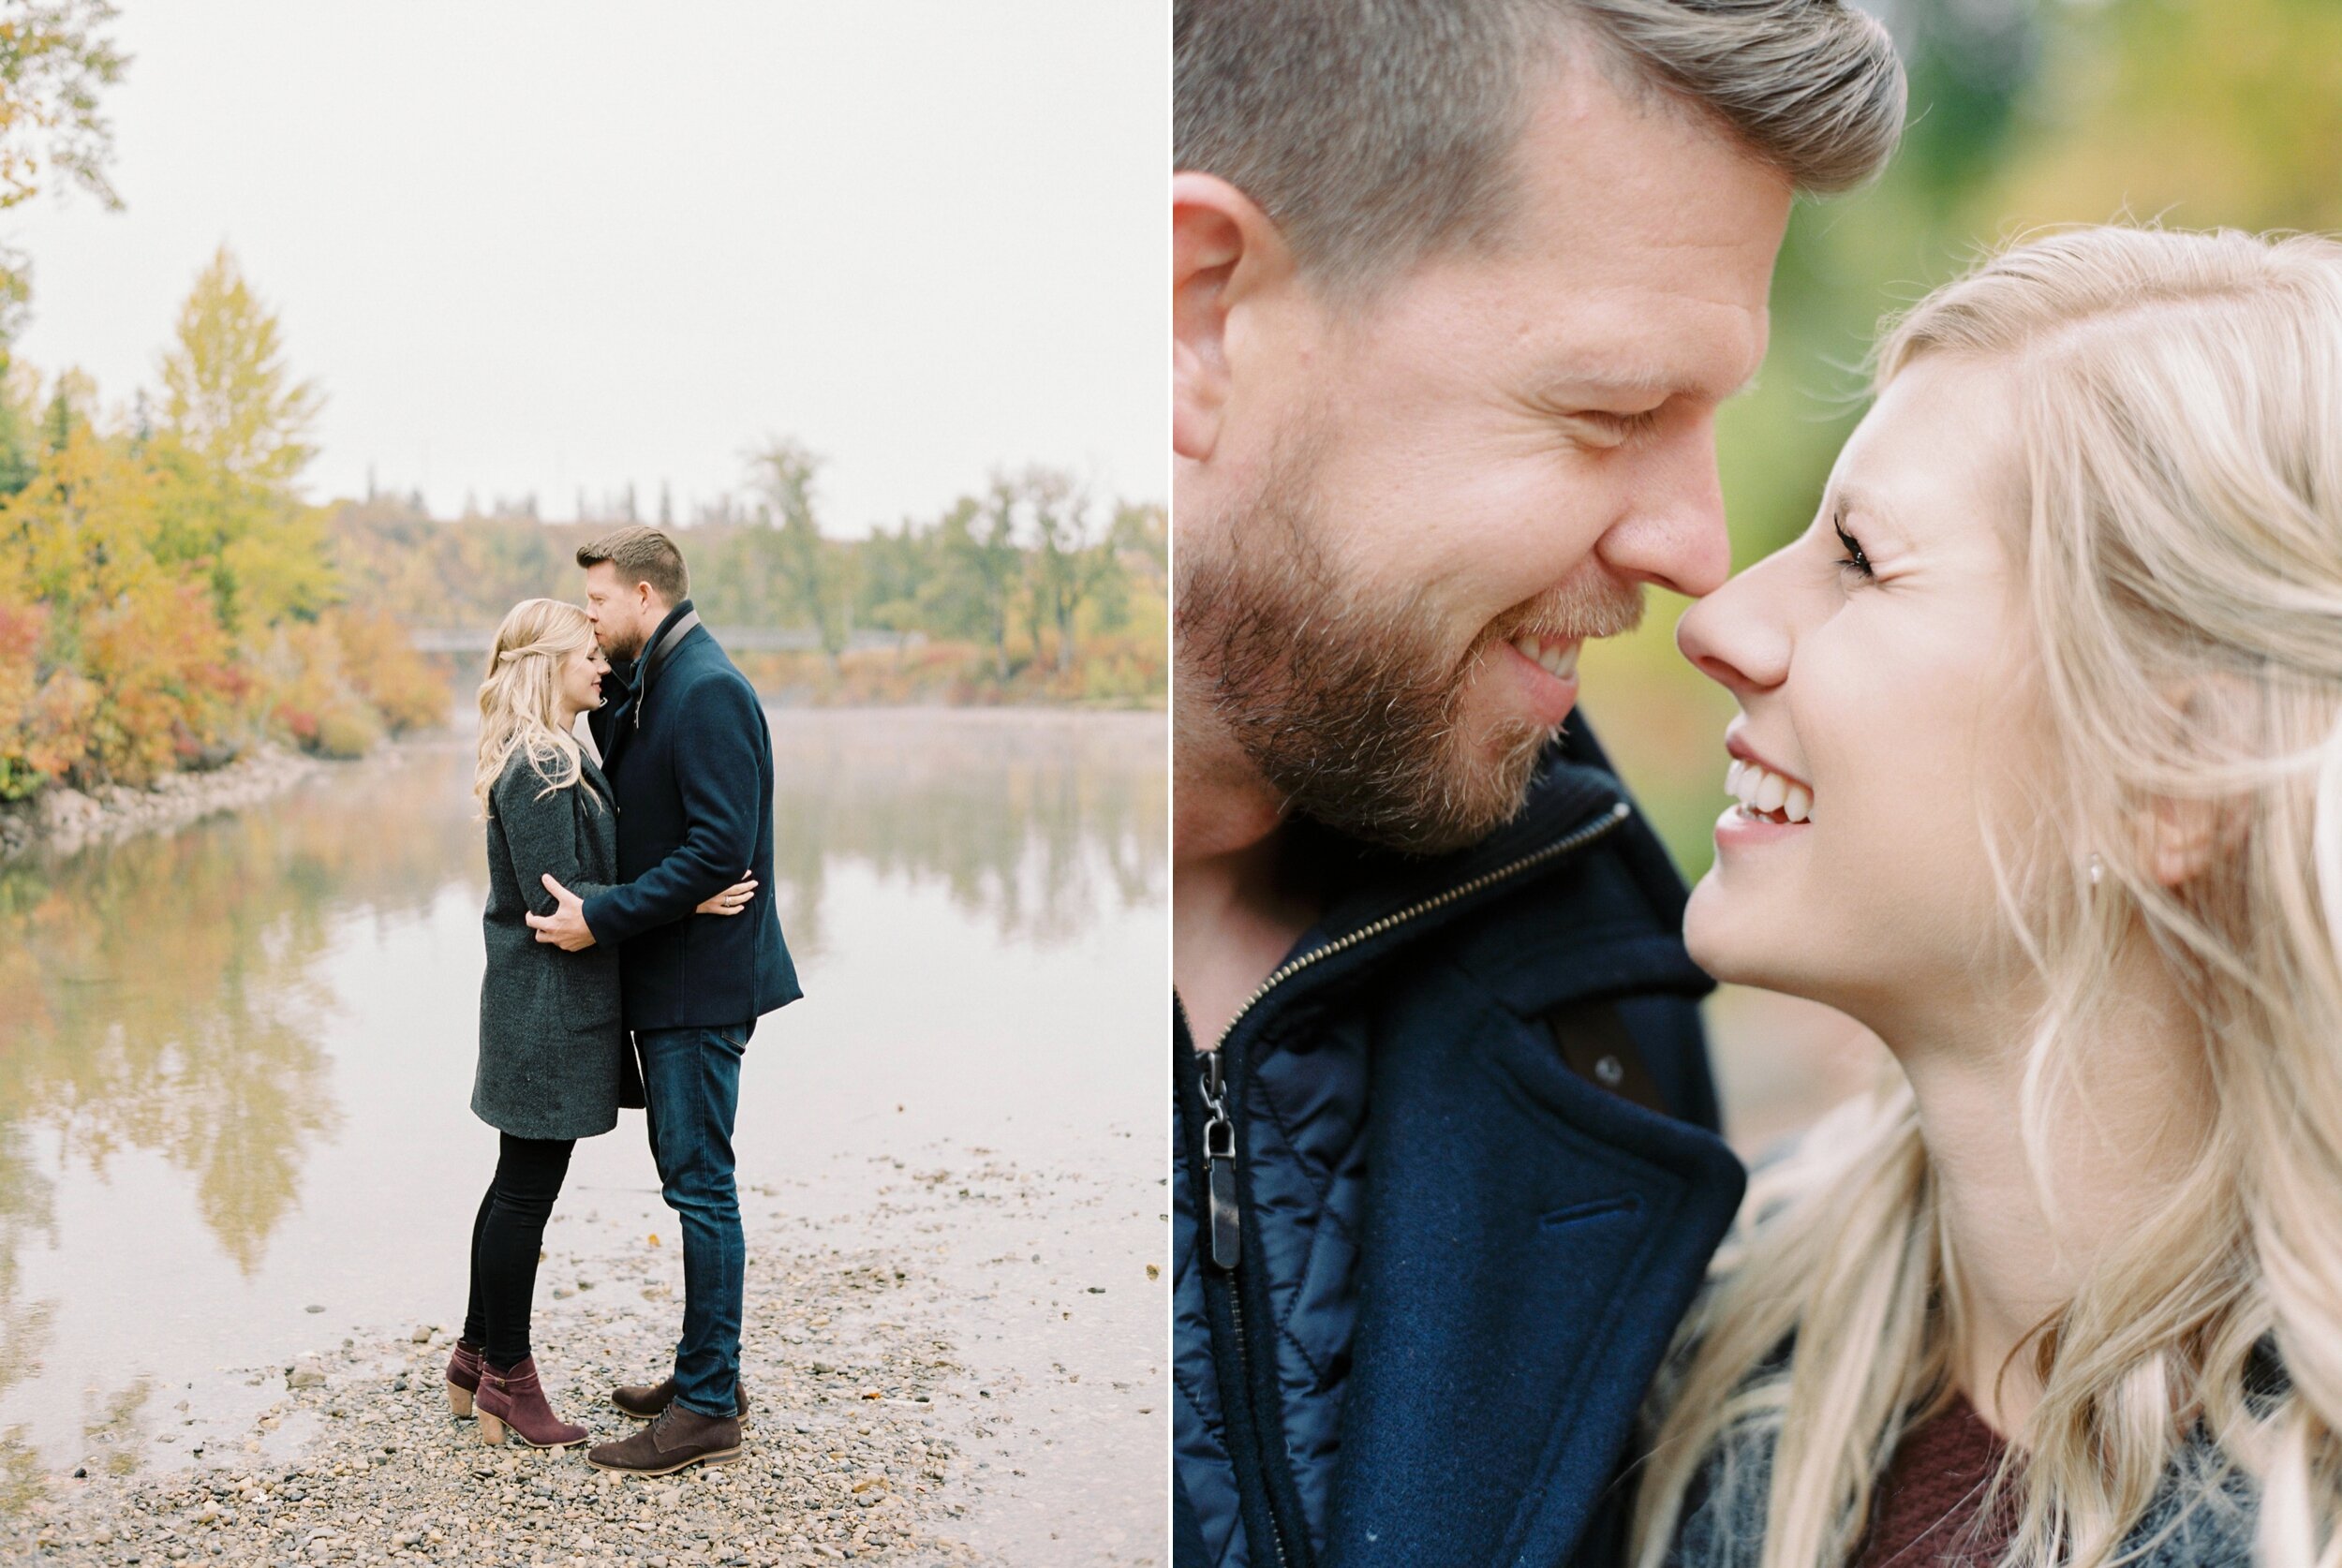  perfect fall colors for calgary river side engagement sesson with dogs | couples pose ideas for engaement photos | fine art film photographers 